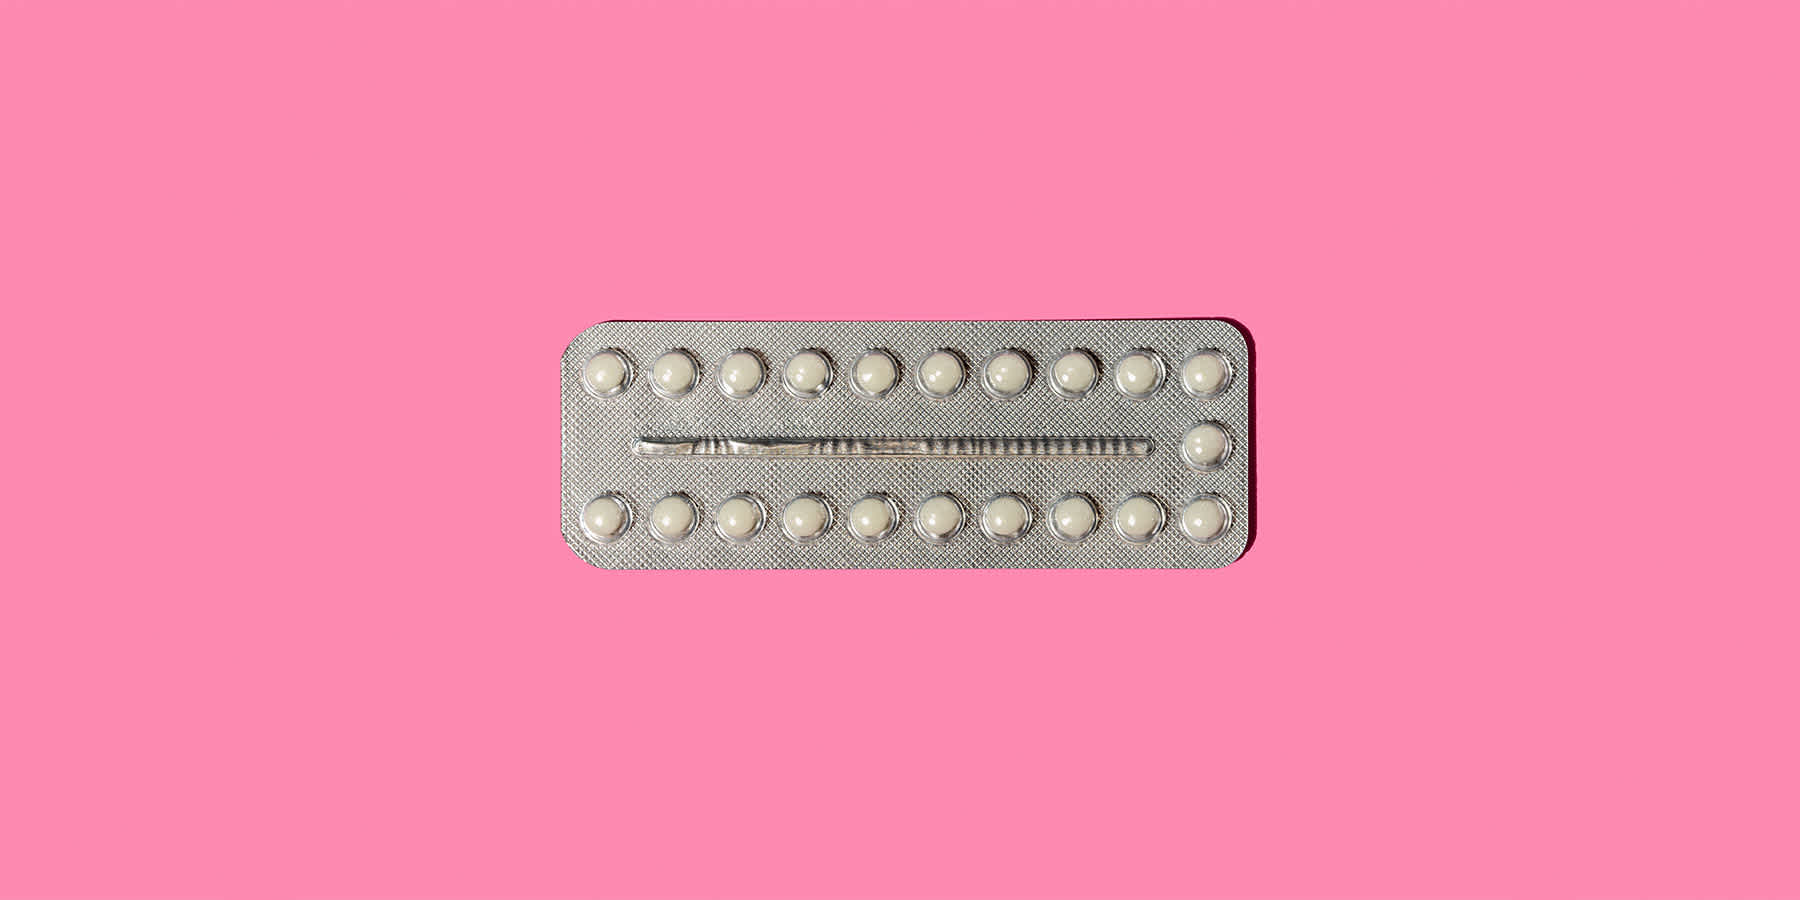 Pack of progesterone pills against a pink background